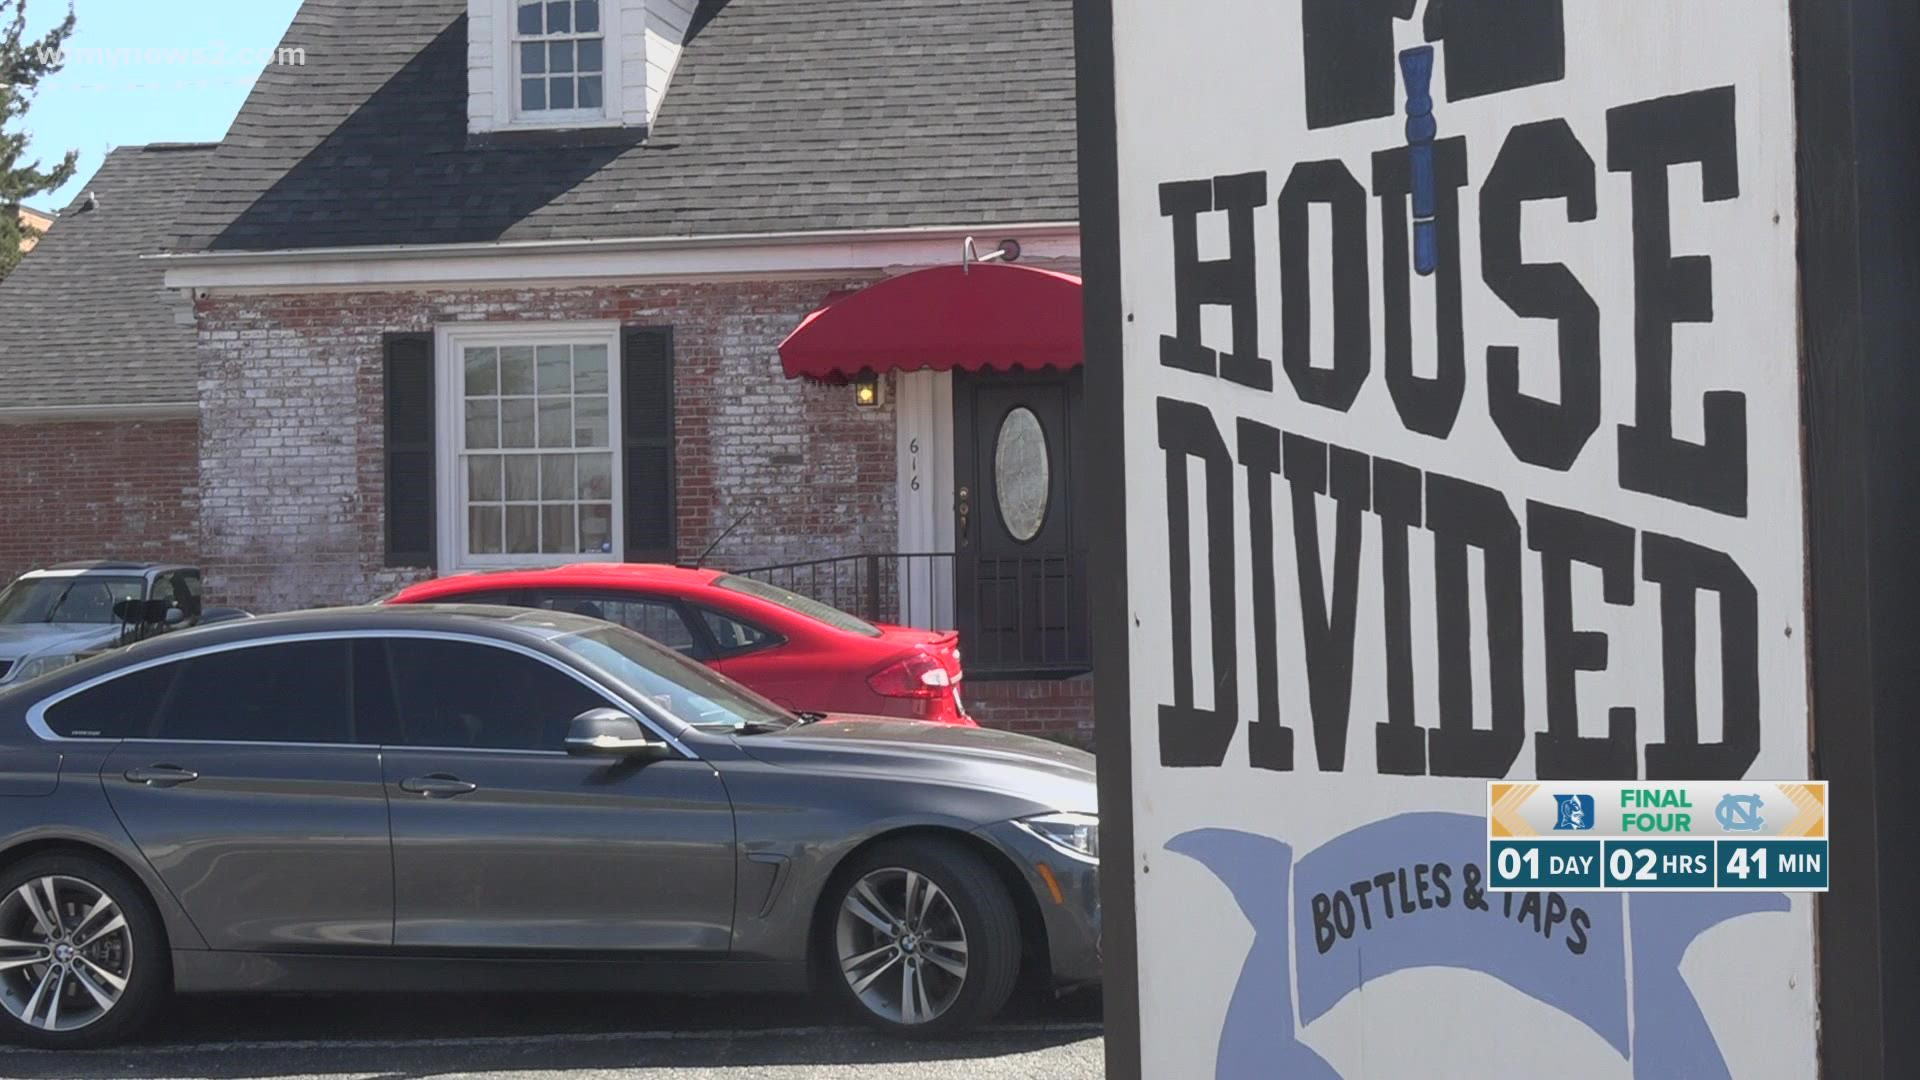 A Greensboro couple is using Duke and UNC's rivalry to fuel business at their restaurant.